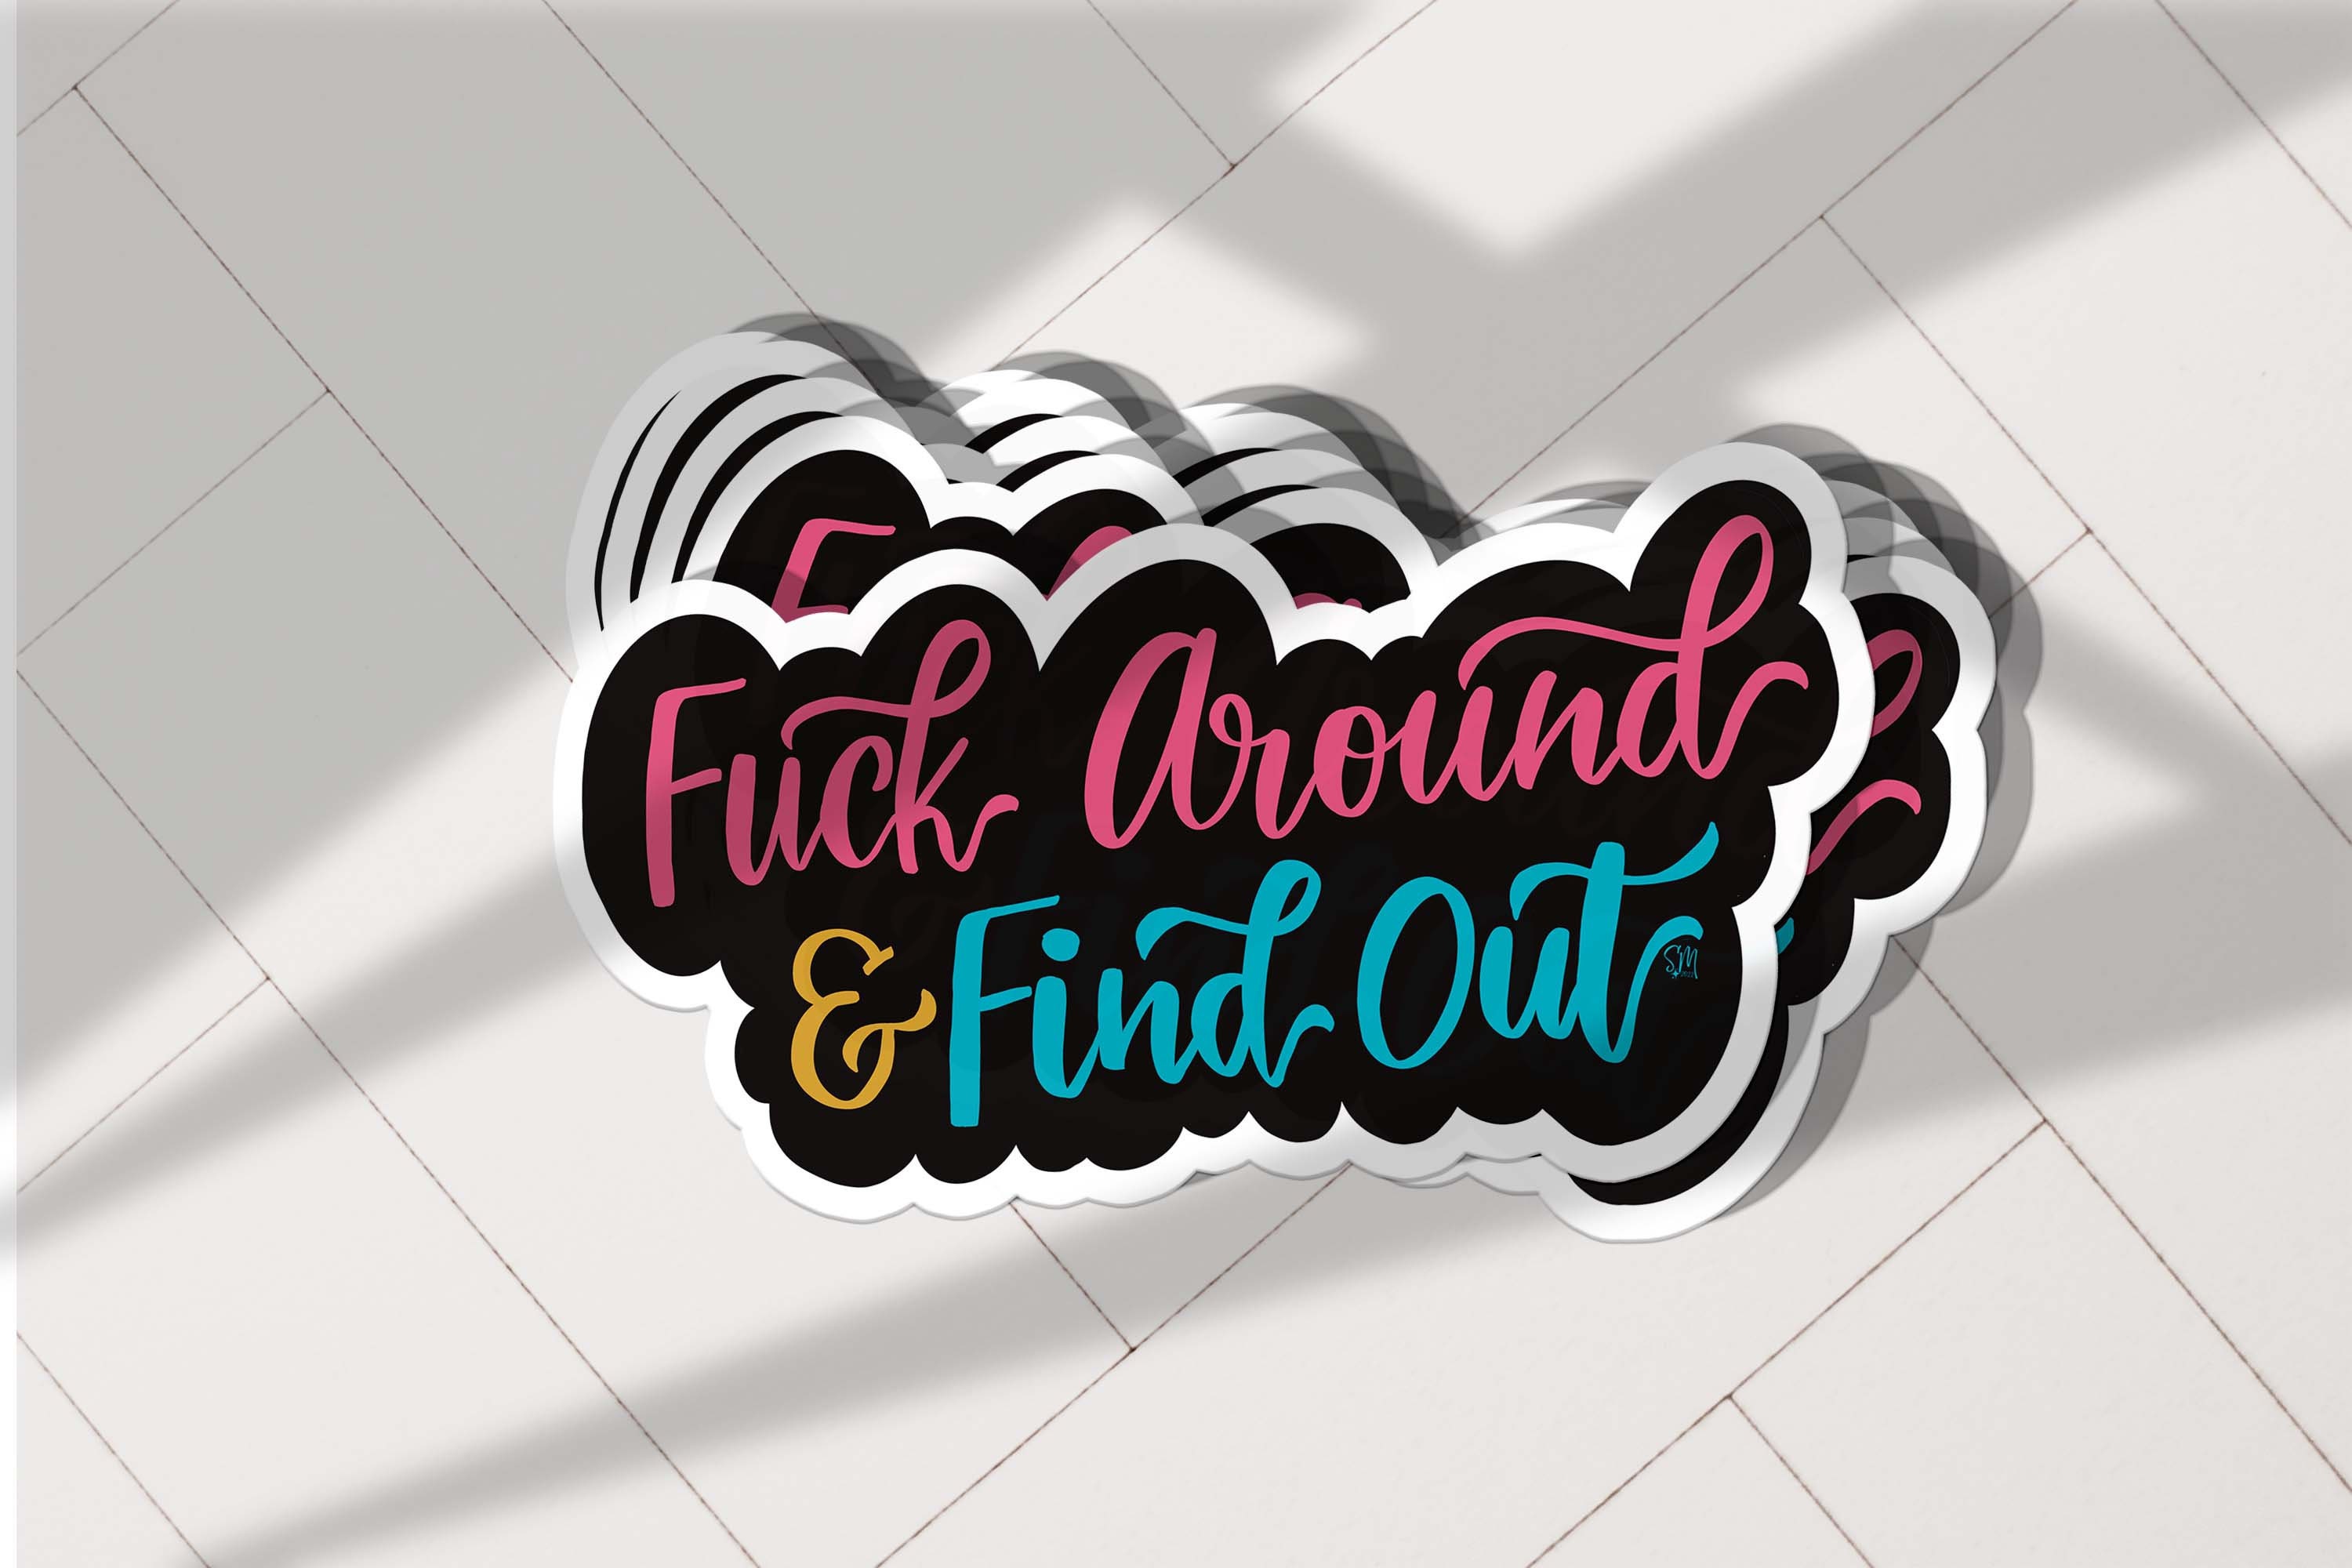 Fuck Around And Find Out Bulk Stickers | Funny Wholesale Stickers